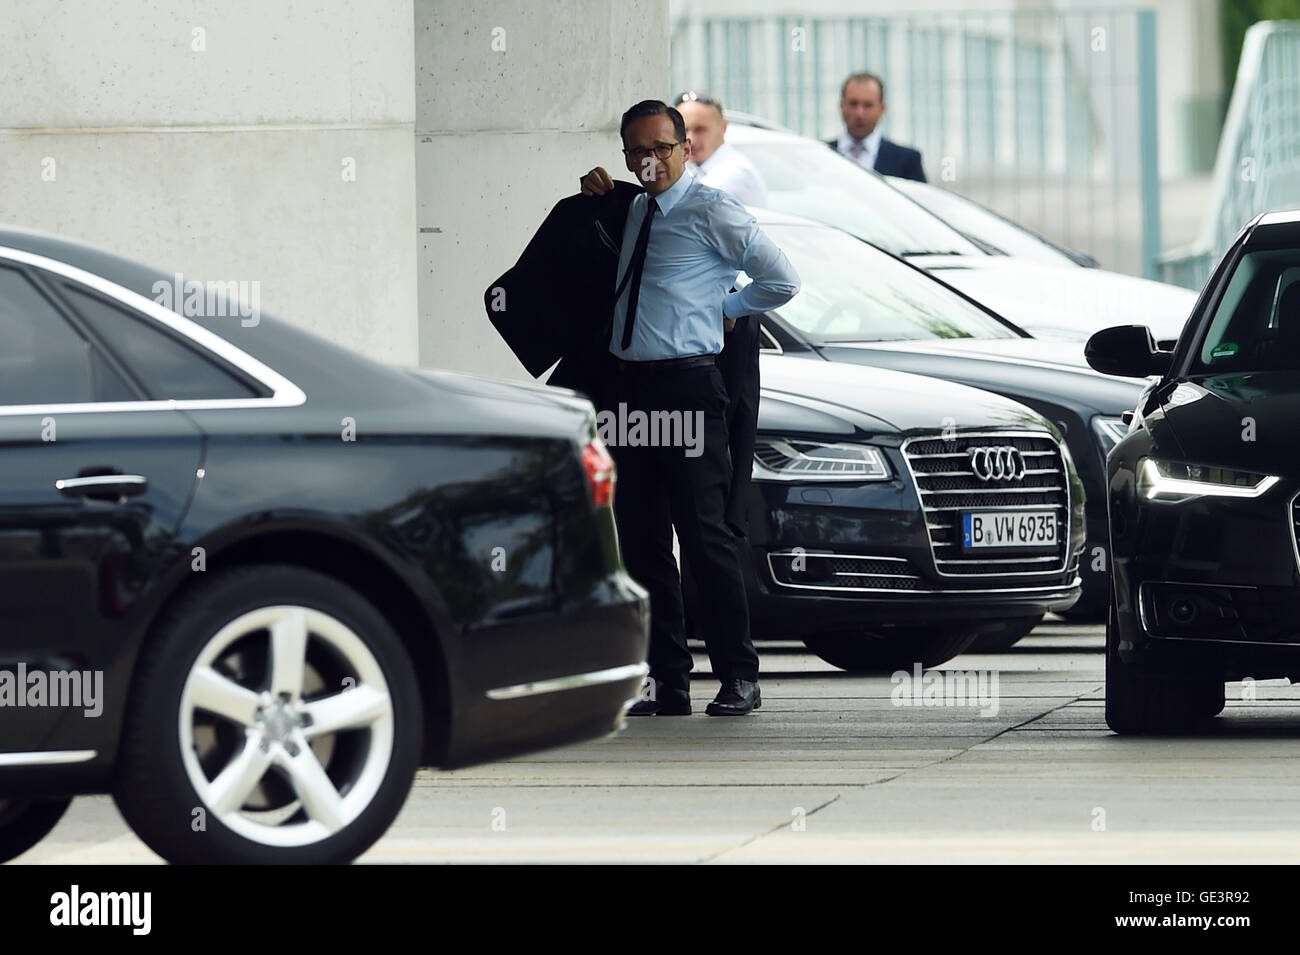 Berlin, Germany. 23rd July, 2016. Justice minister Heiko Maas (SPD) arrives for emergency talks on the security situation at the federal chancellery in Berlin, Germany, 23 July 2016. After an attack in Munich interior minister de Maizière (CDU) has ordered flags at half-mast throughout Germany. An 18-year-old German-Iranian had killed nine people and himself in Munich on Friday evening. The background and motive of the attack remain unclear. PHOTO: Maurizio Gambarini/dpa/Alamy Live News Stock Photo